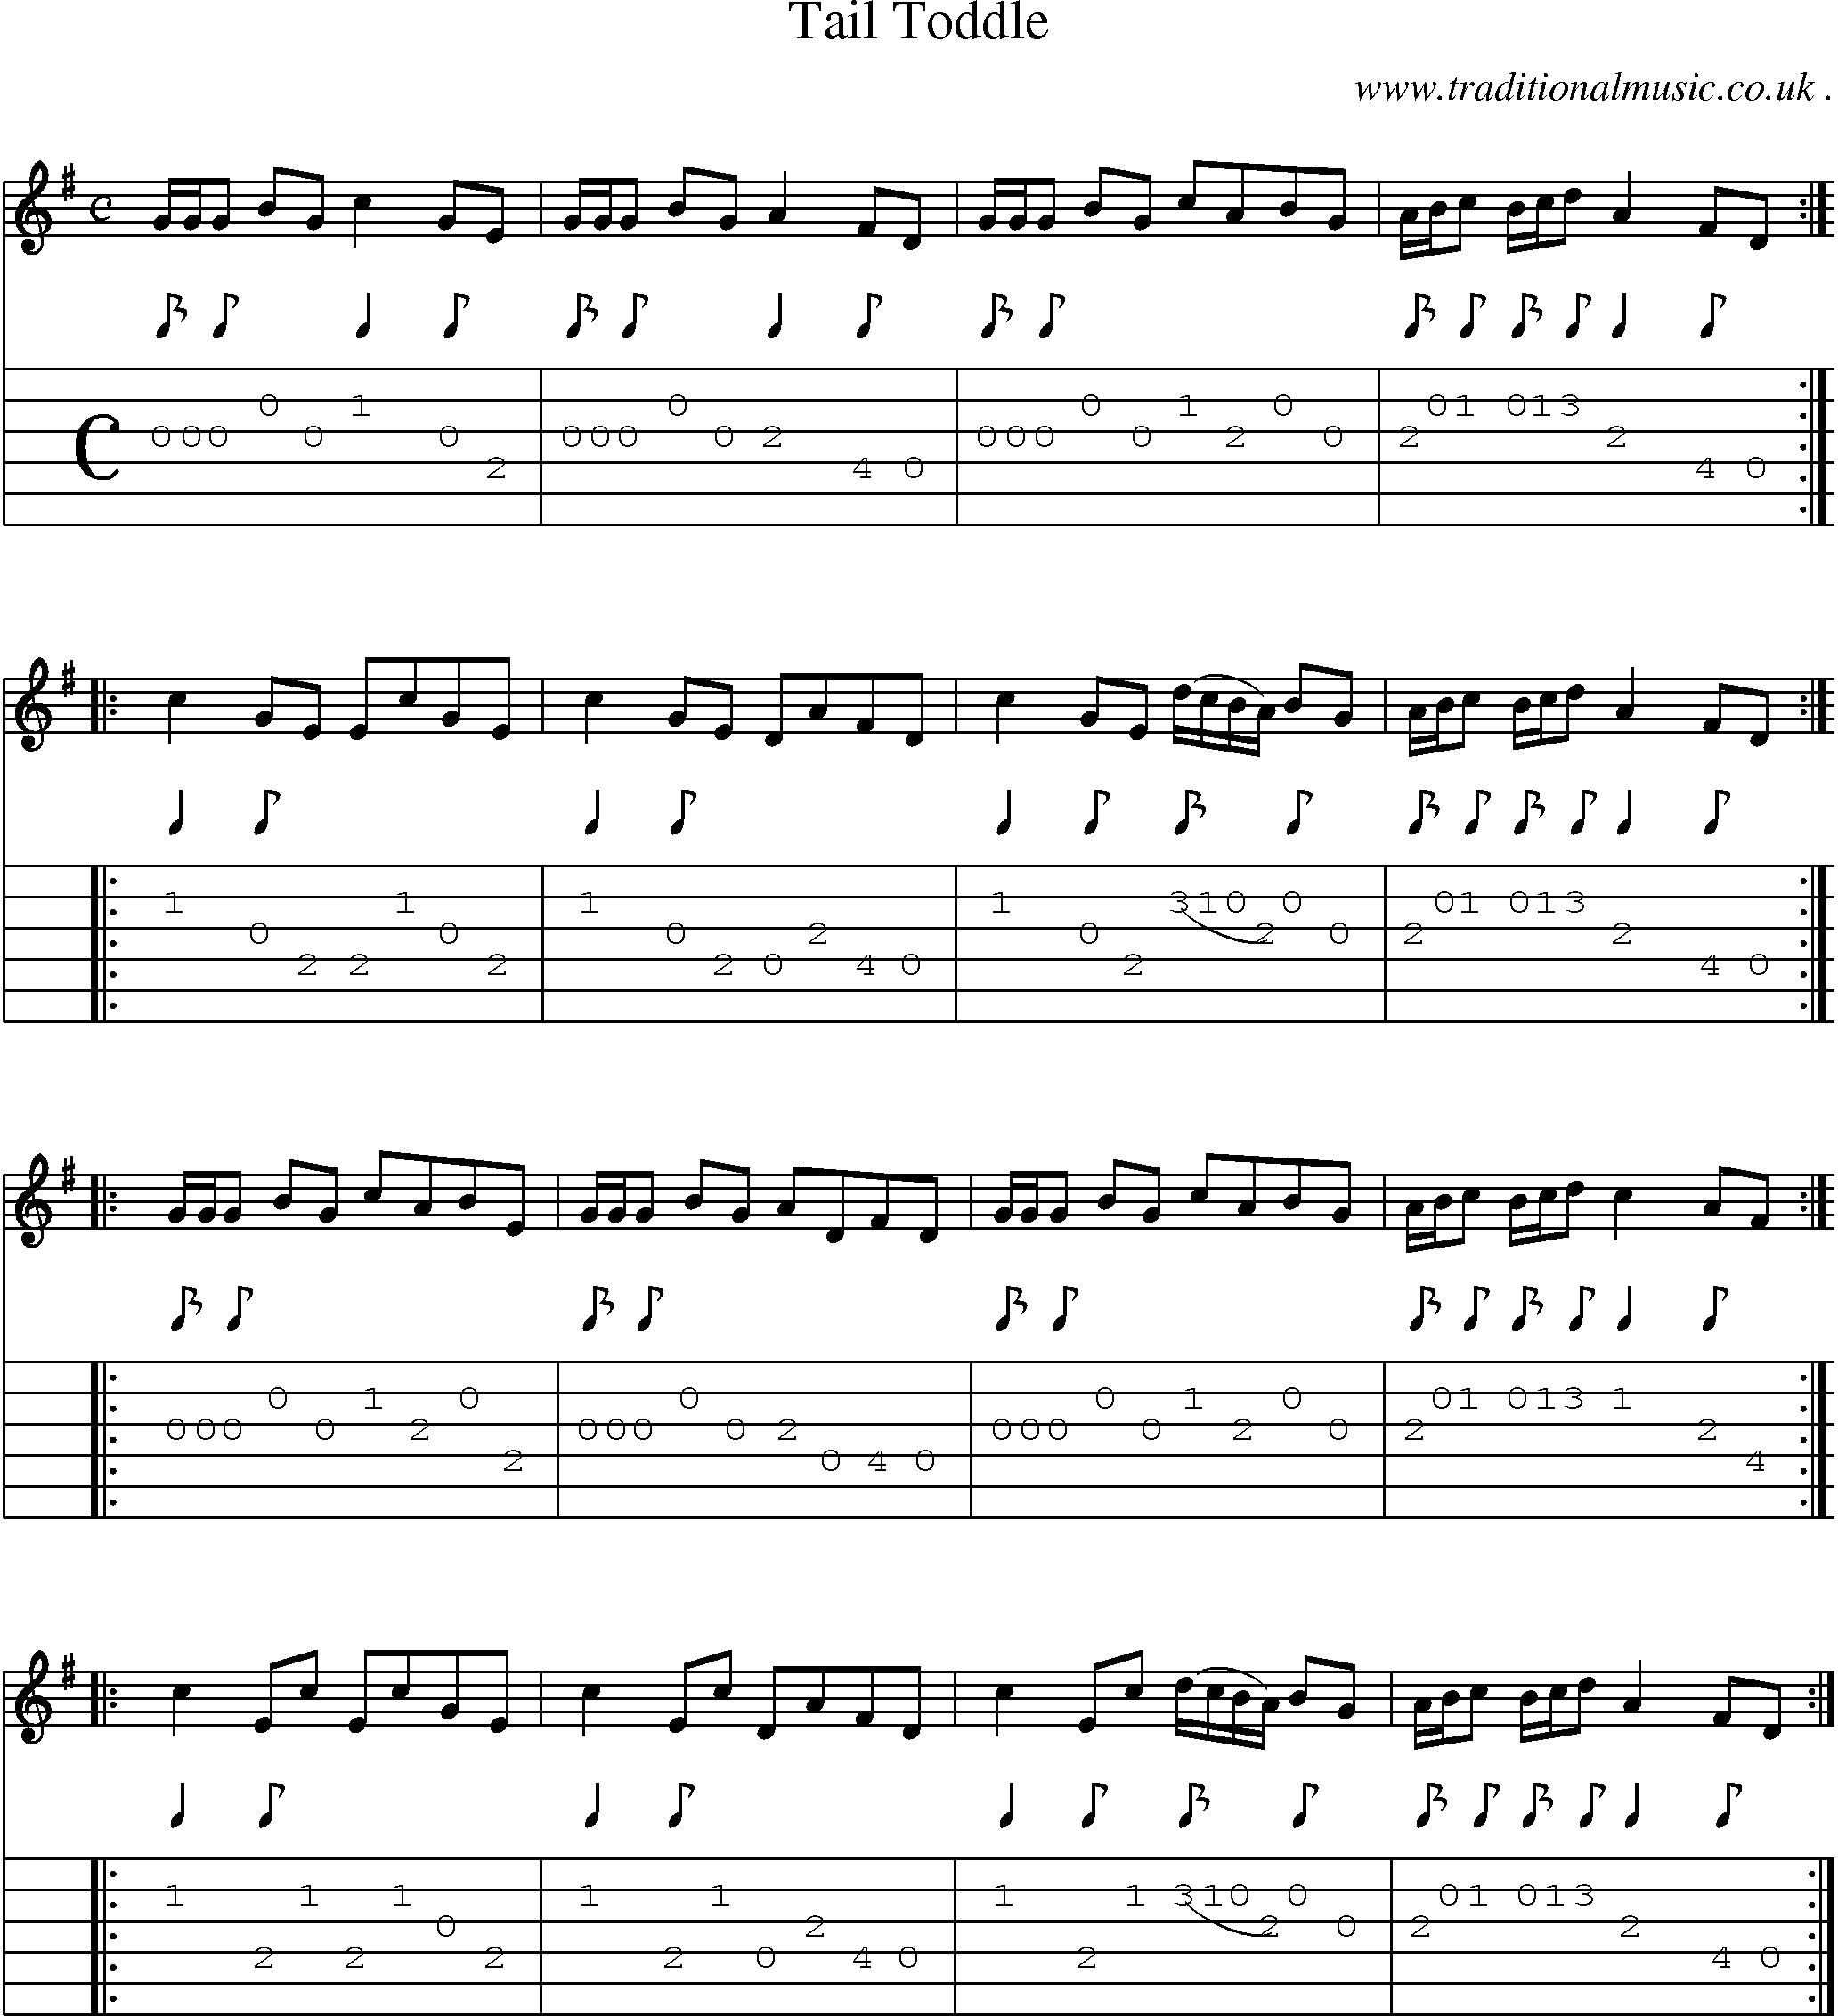 Sheet-Music and Guitar Tabs for Tail Toddle